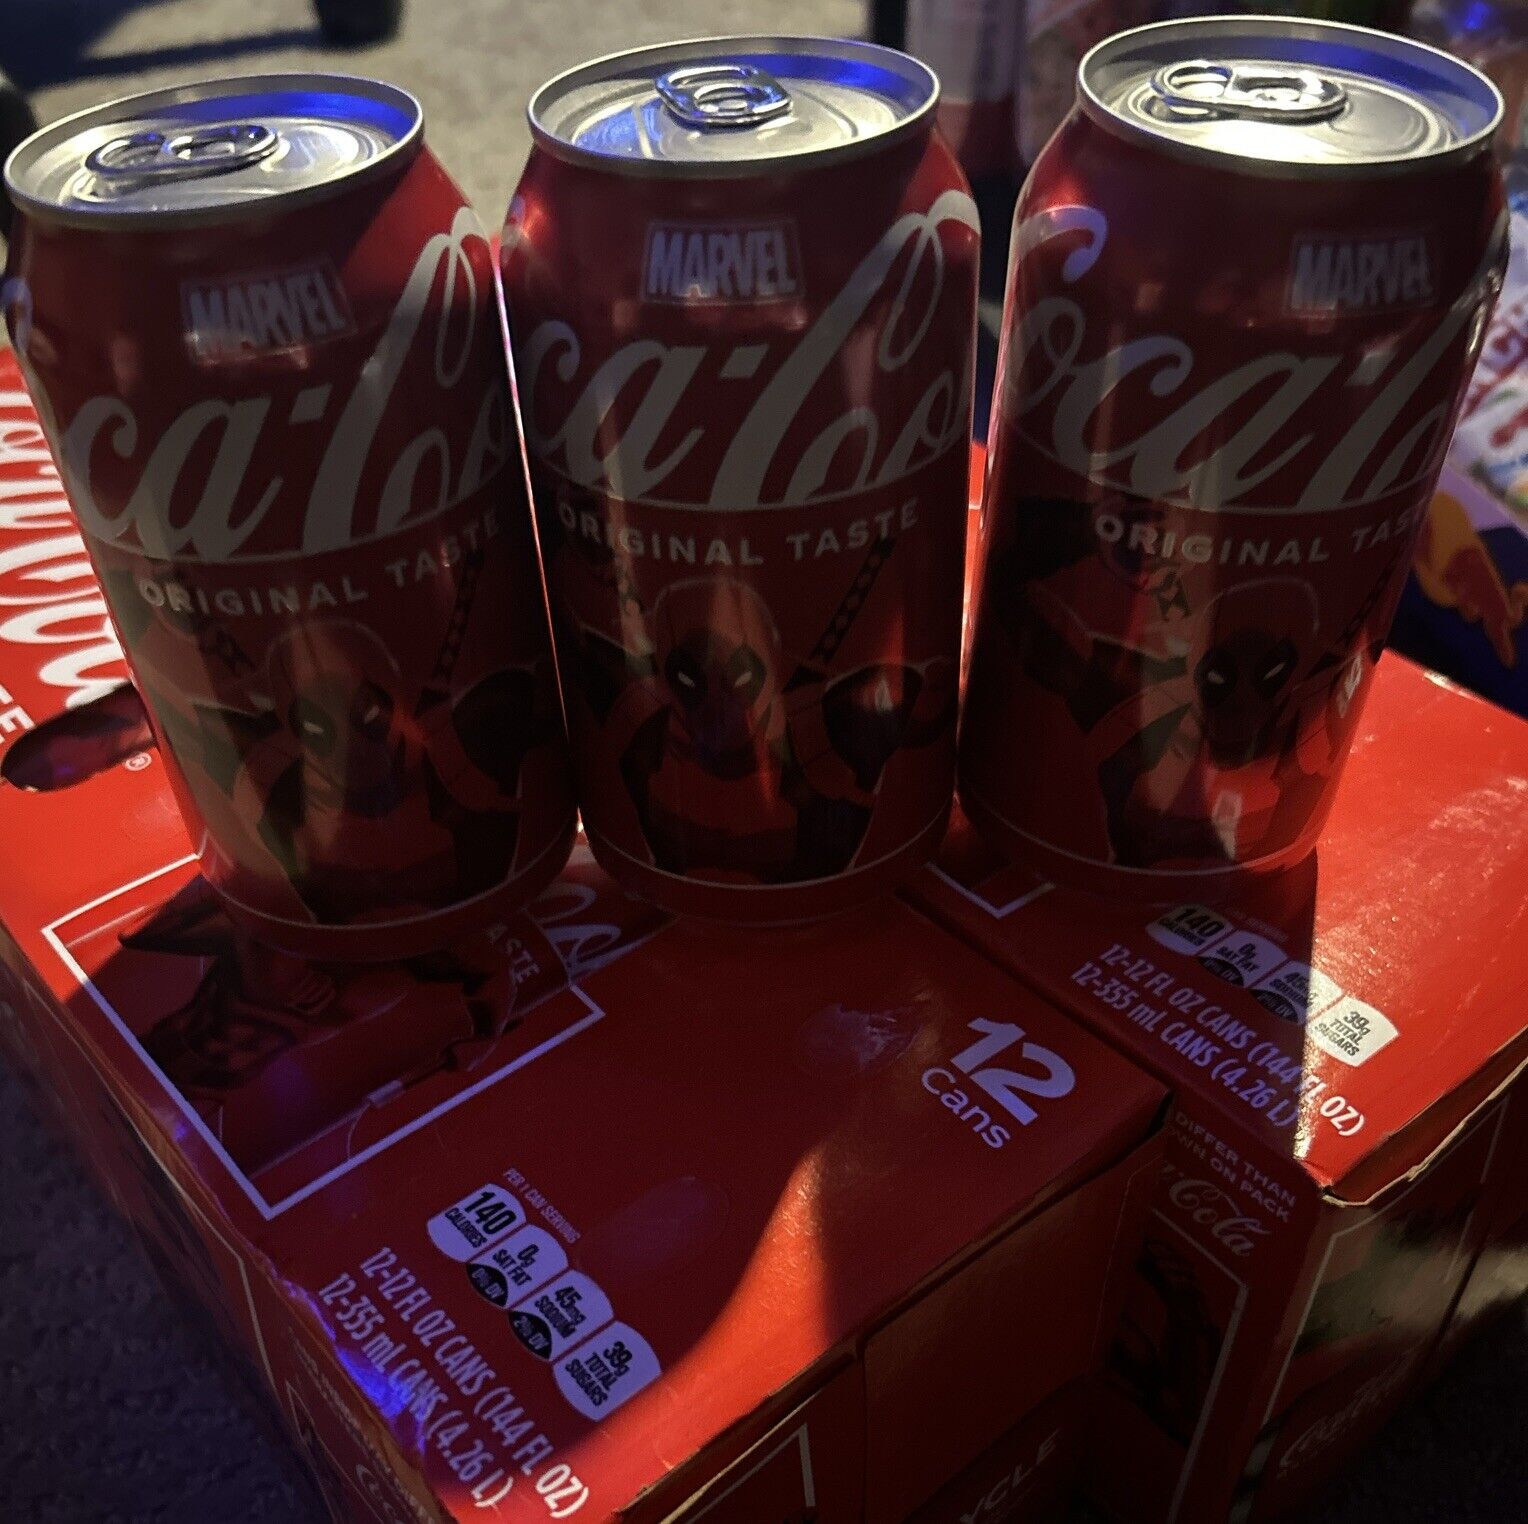 Marvel Coca Cola Deadpool Can UNOPENED - Original Multiple Available 1 Can Per.